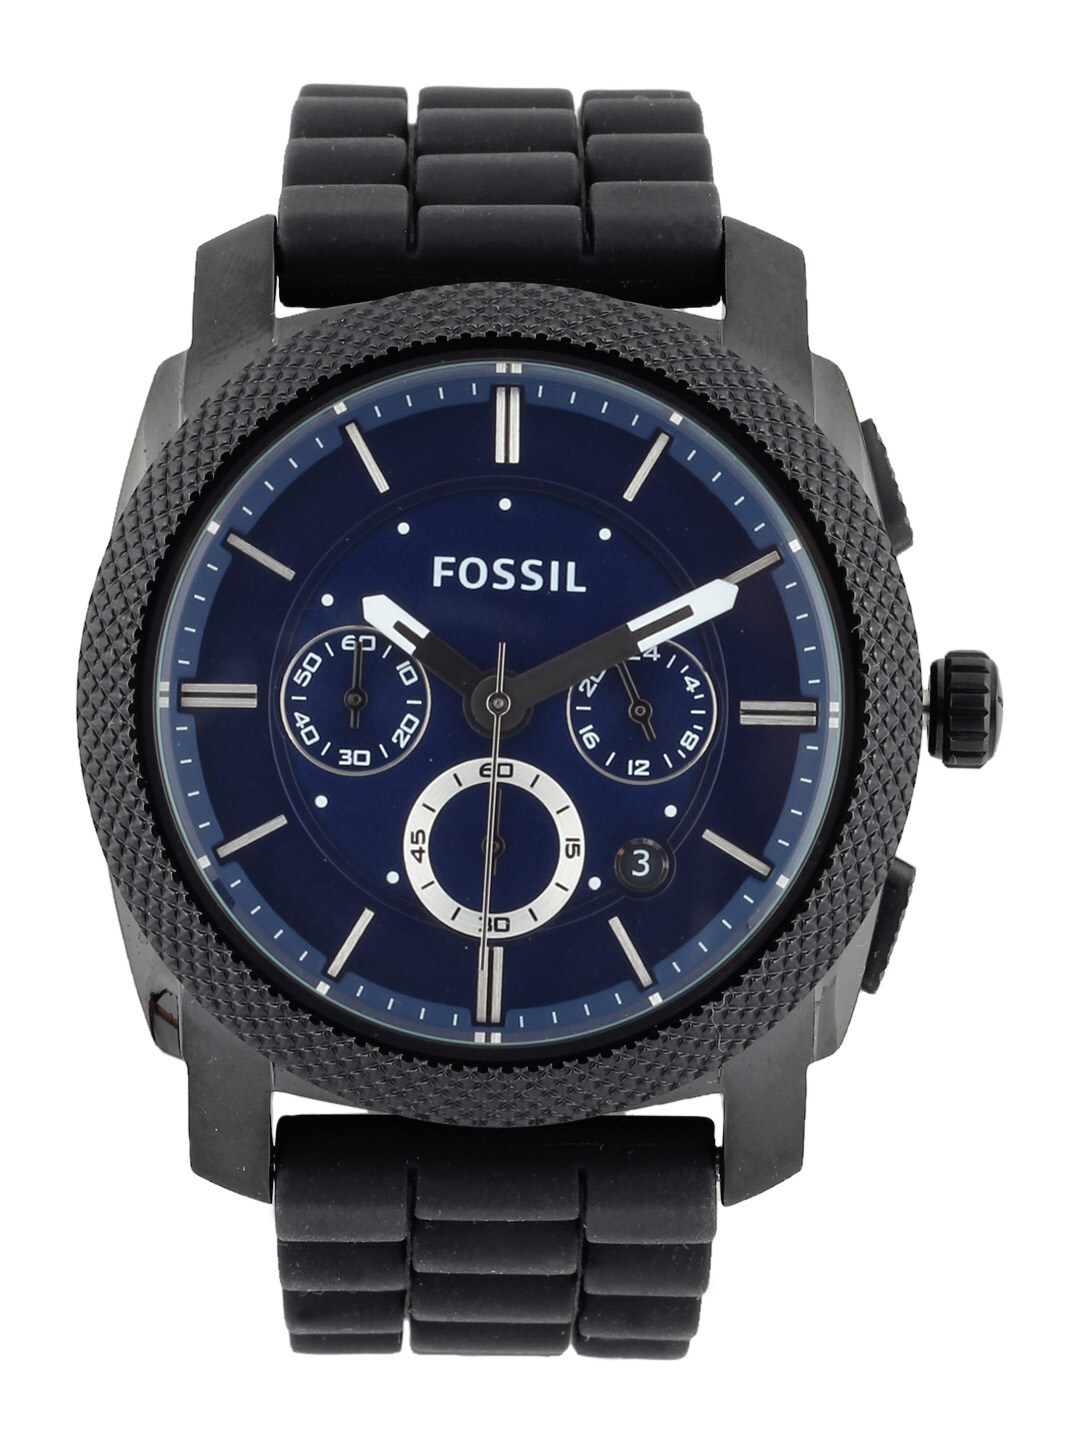 Fossil Men Blue Dial Analog Chronograph Watch FS4605